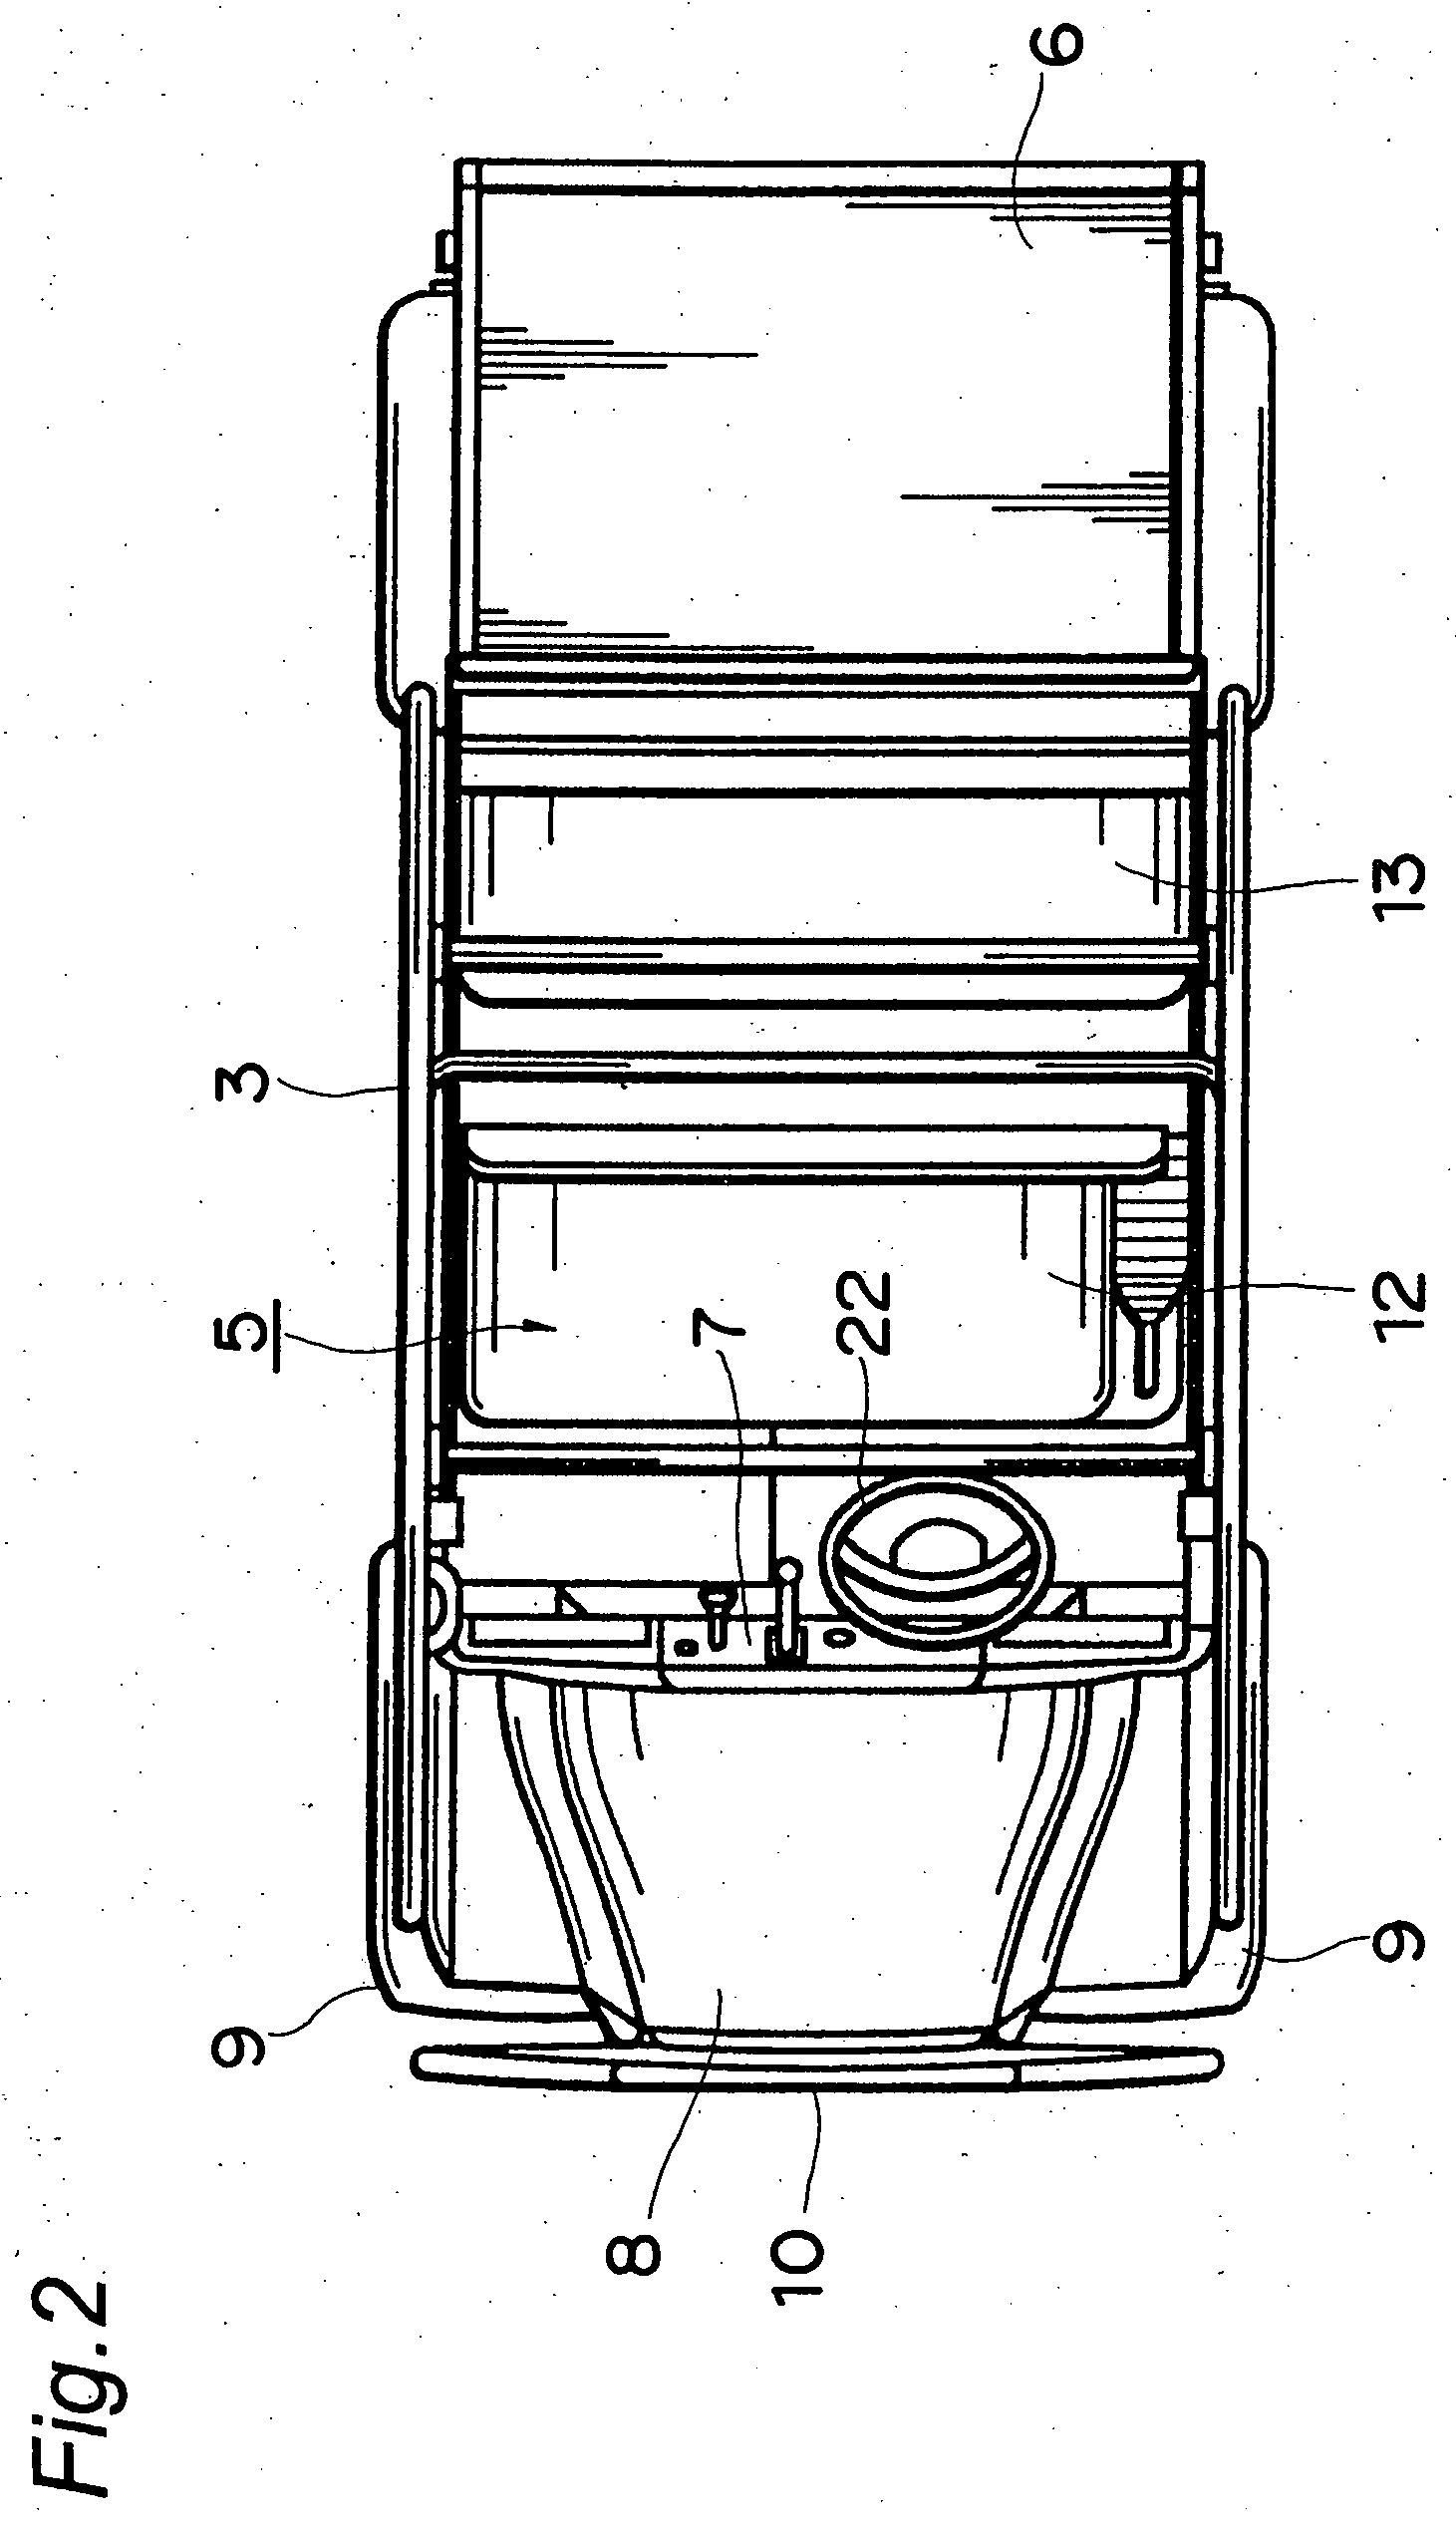 Electric power steering system for vehicle and utility vehicle therewith